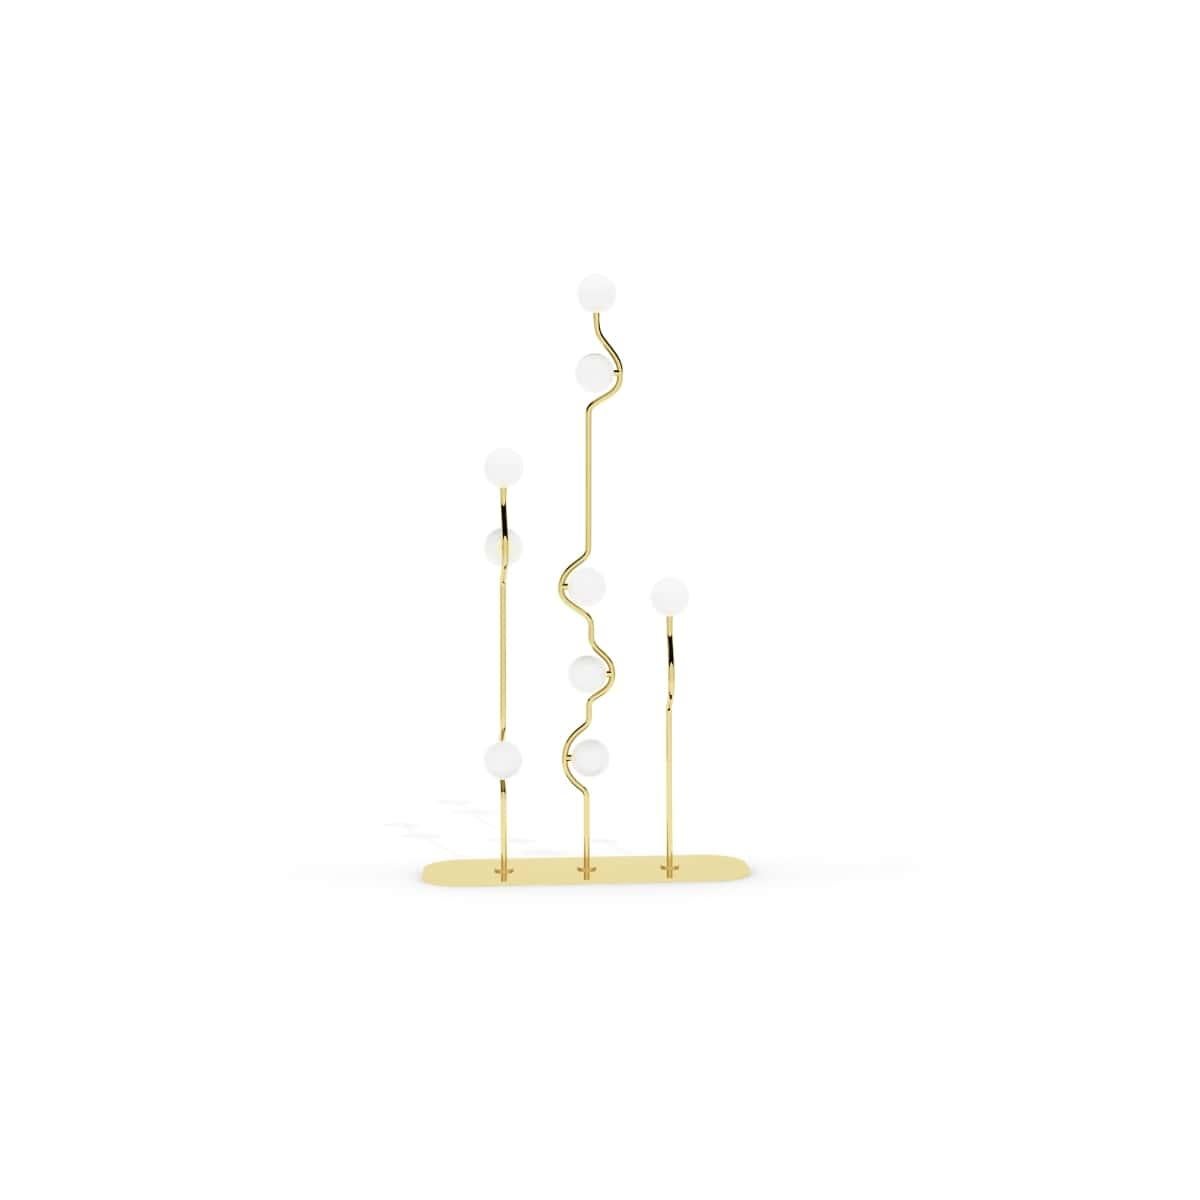 The branch lamp collection stands out for its particular forms that make us remind of the branch of a tree. An unusual form for a lamp design. Masquespacio has a clear strategy to reach and enchant end users of various markets, going for every